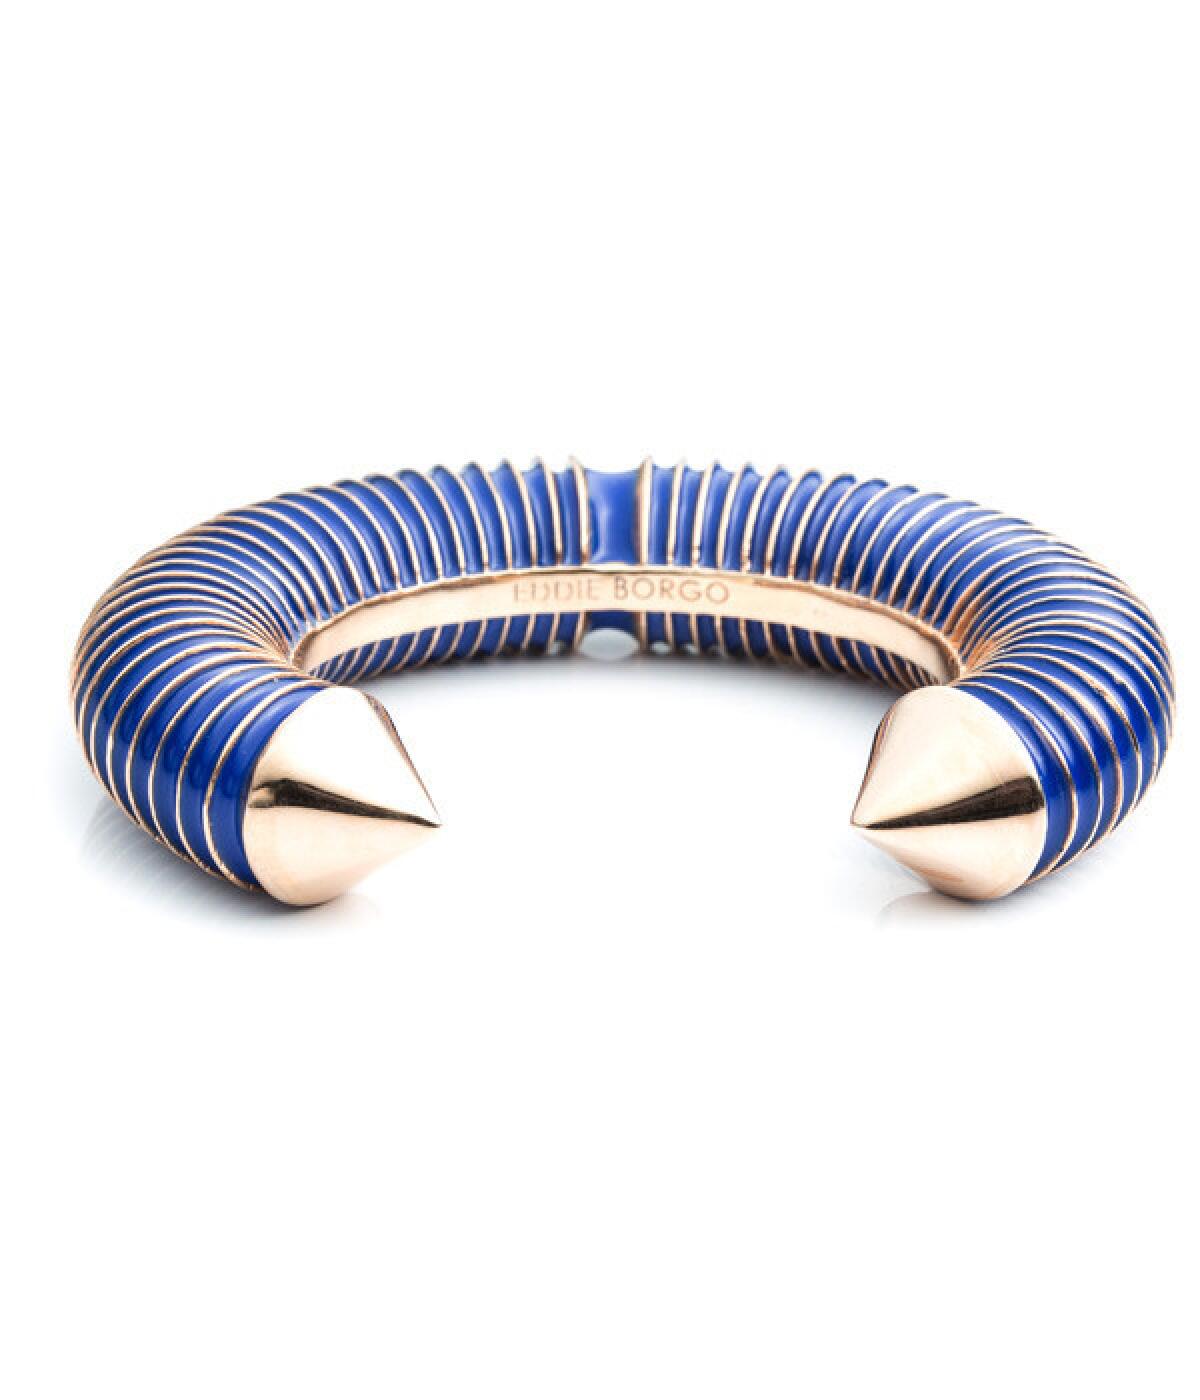 Eddie Borgo enameled scaled cuff in rose gold and blue